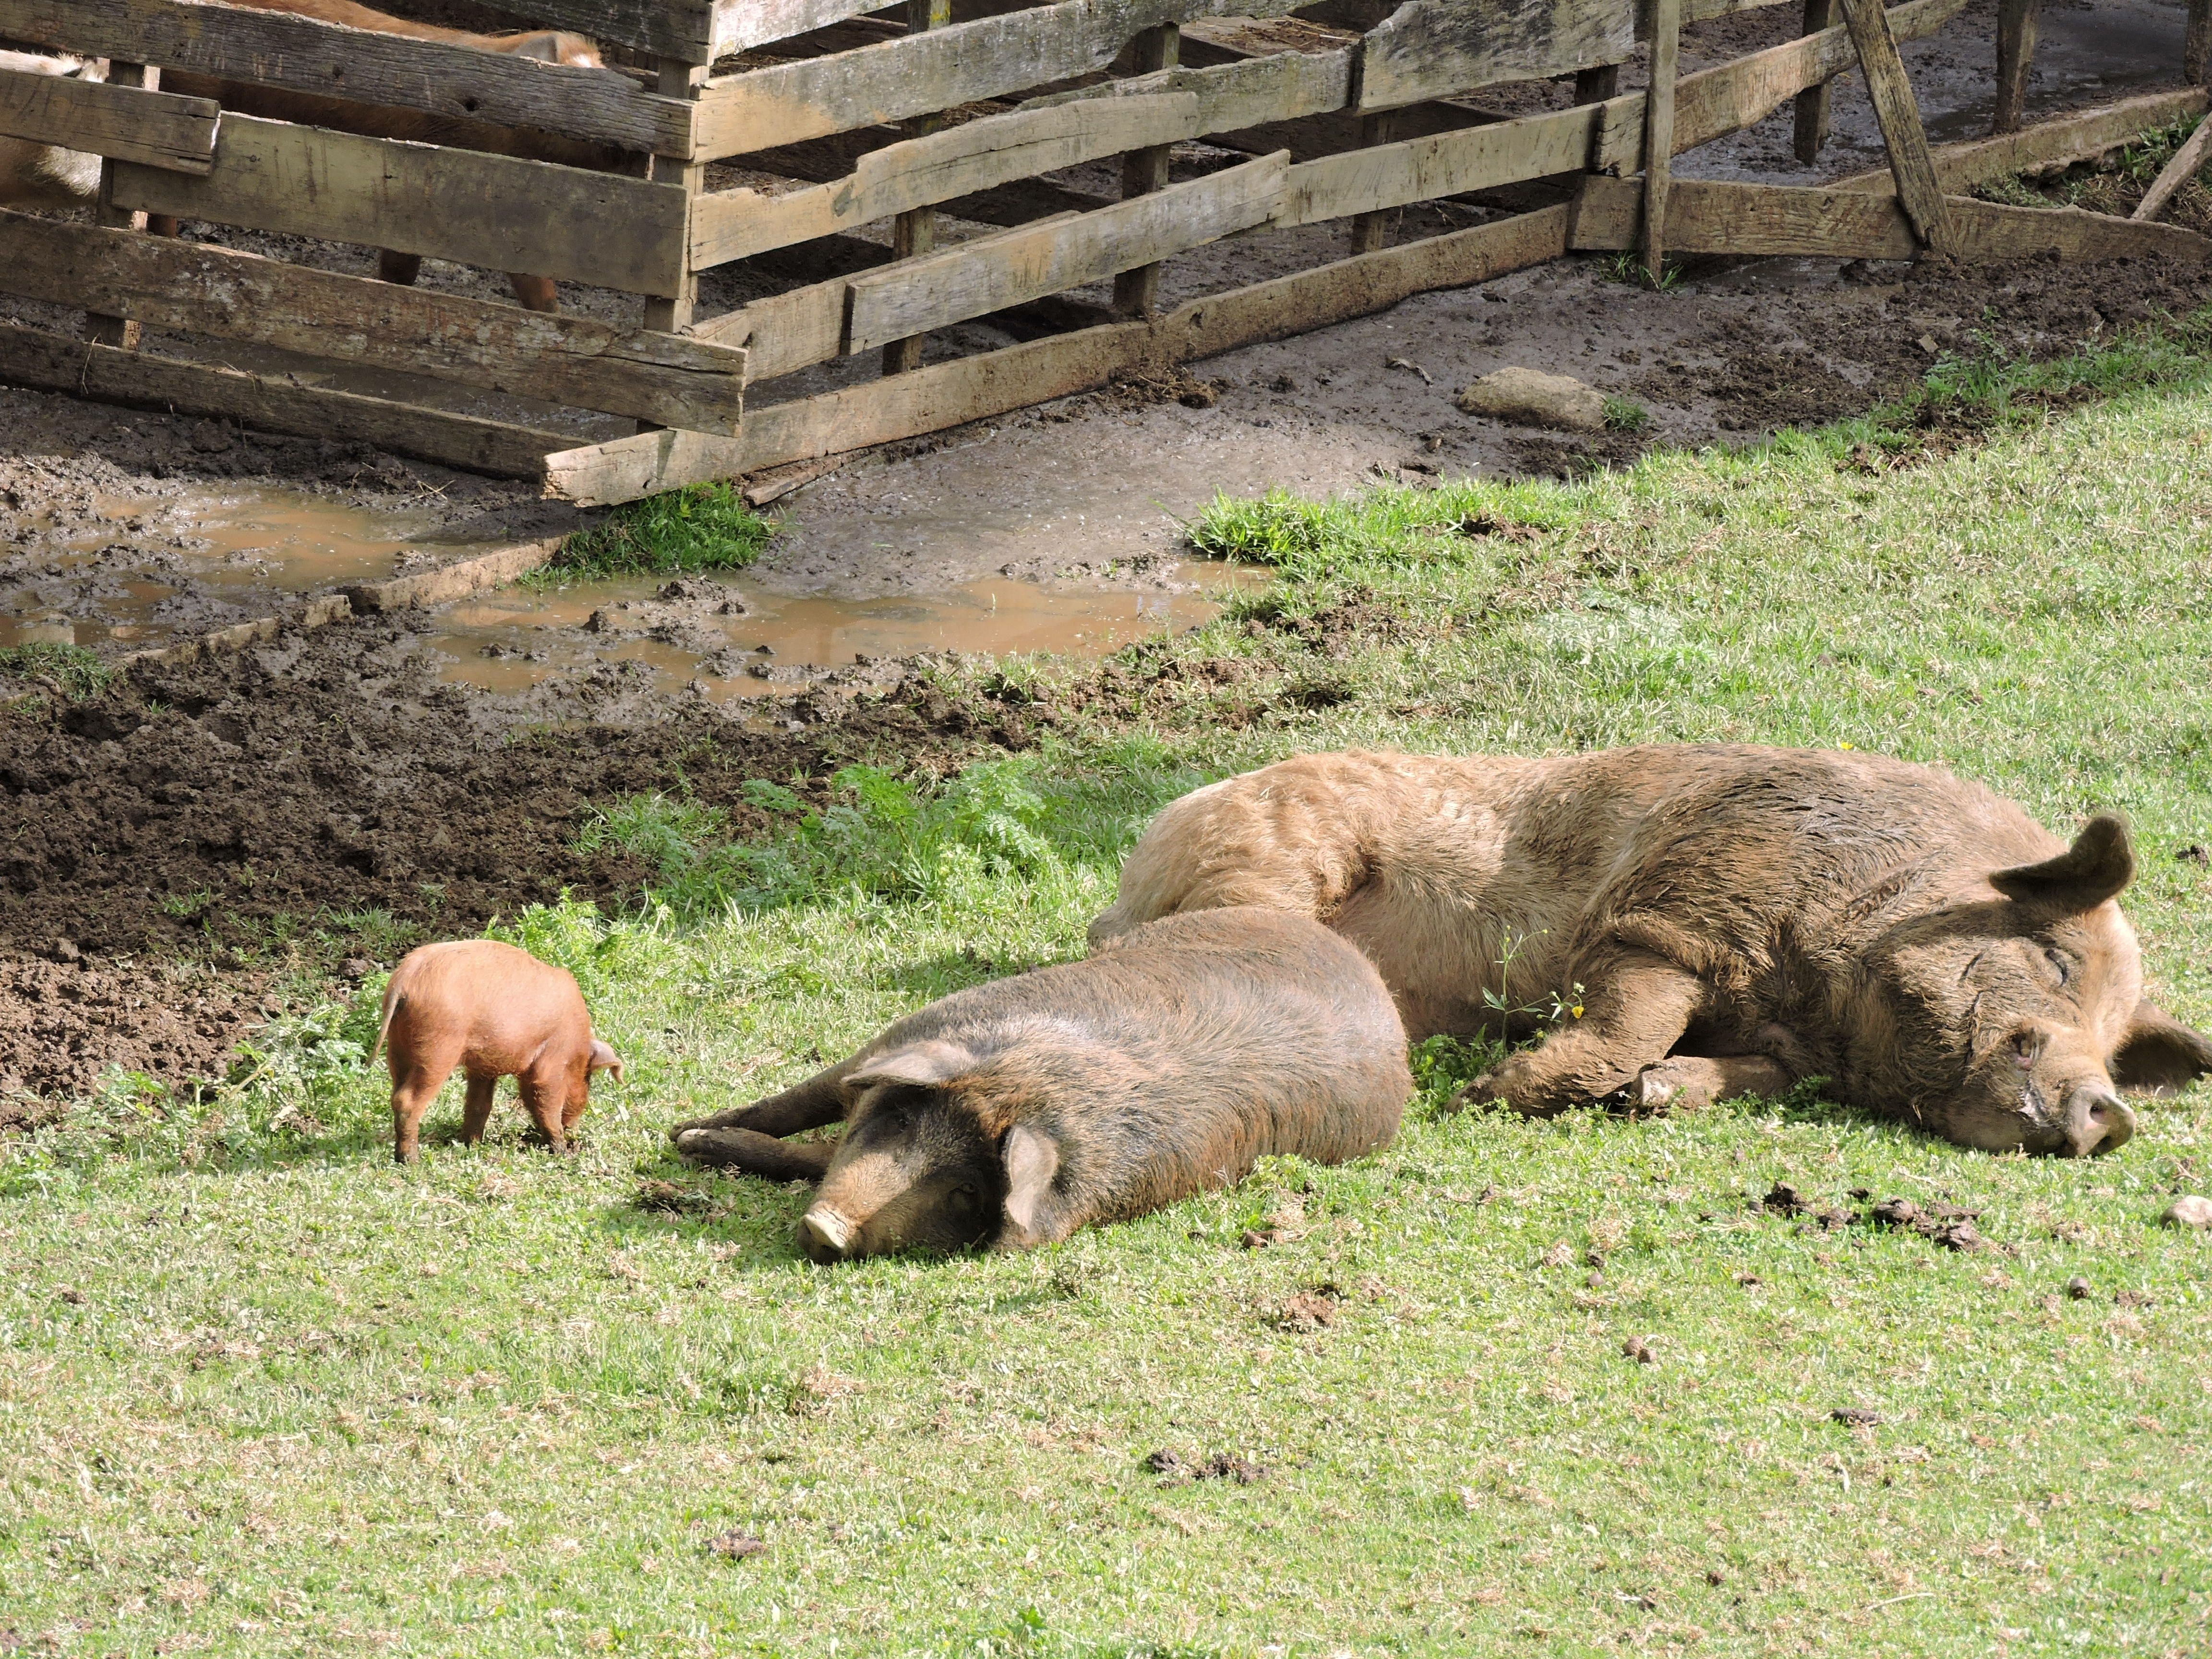 Pigs lieing on grass and sleeping on farm in Brazil. 